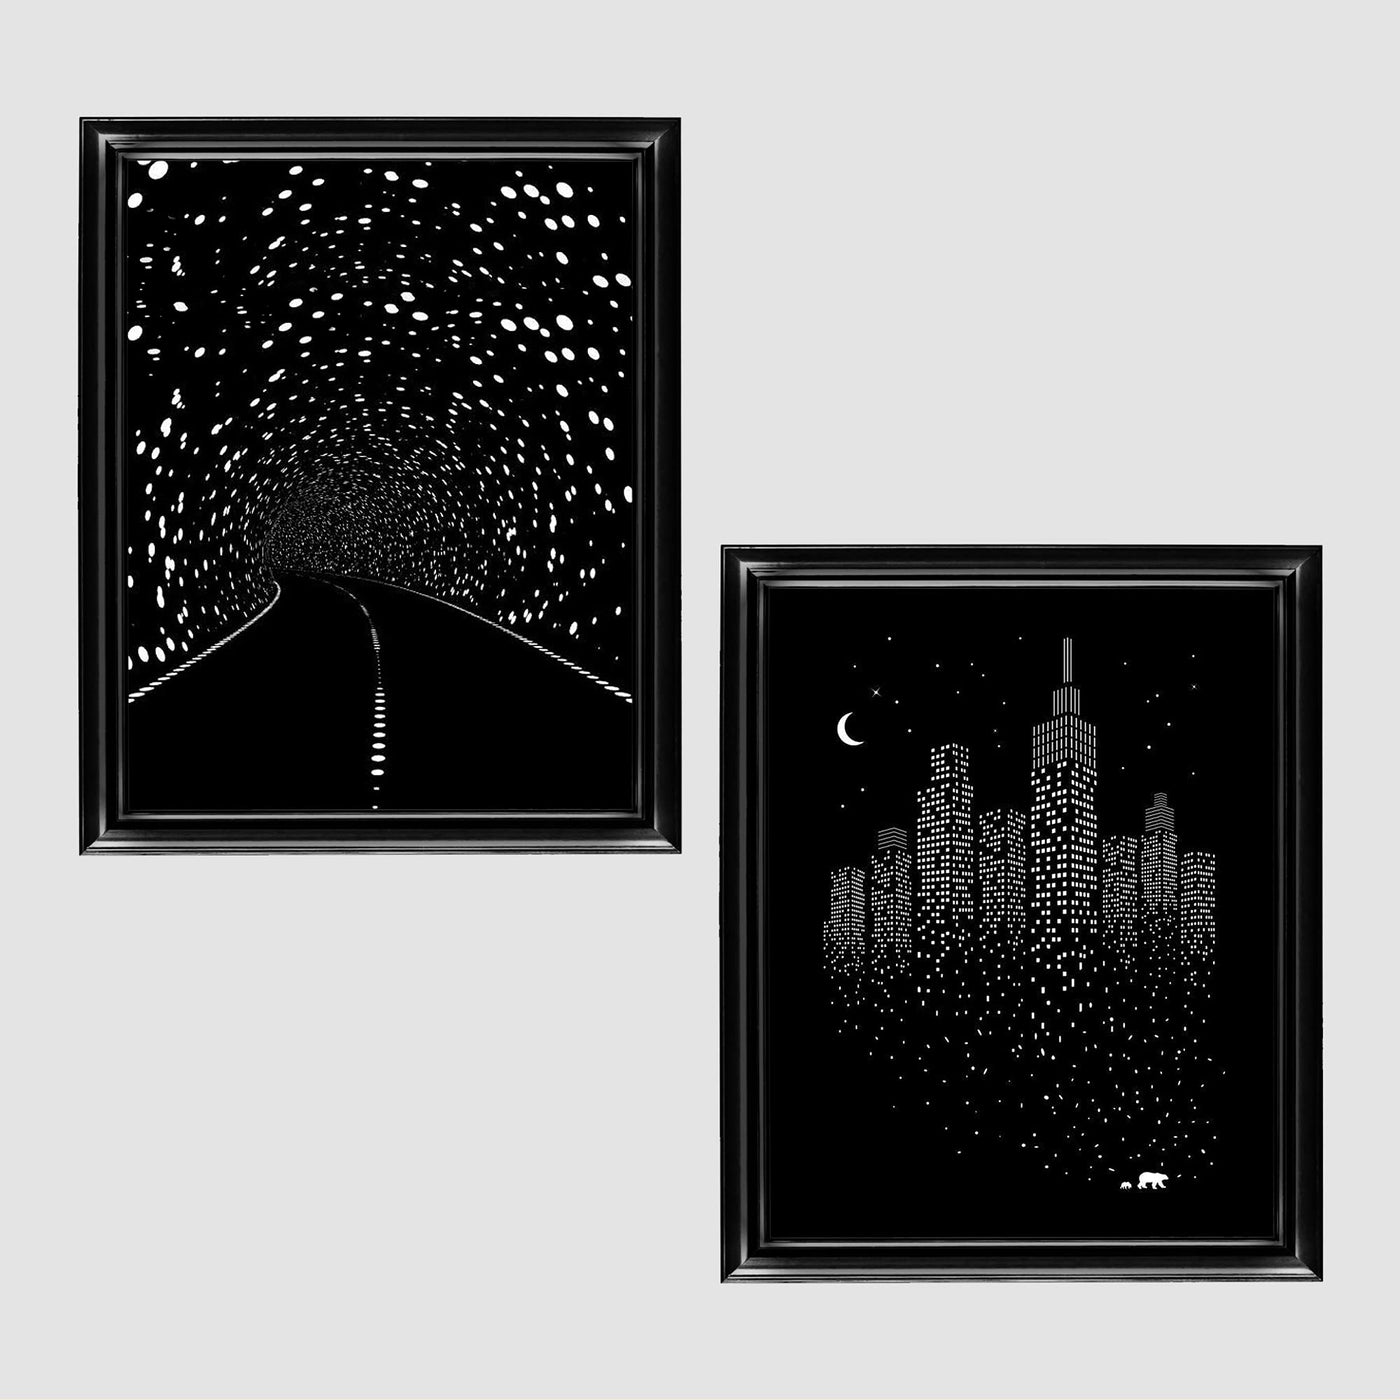 Illusive Road to Minimal City- Optical Illusion Prints Set (2) 8 x 10"- Abstract Wall Art-Ready to Frame. Modern Home-Studio-Office-Dorm D?cor. Very Cool Gift for Illusion Art Fans.